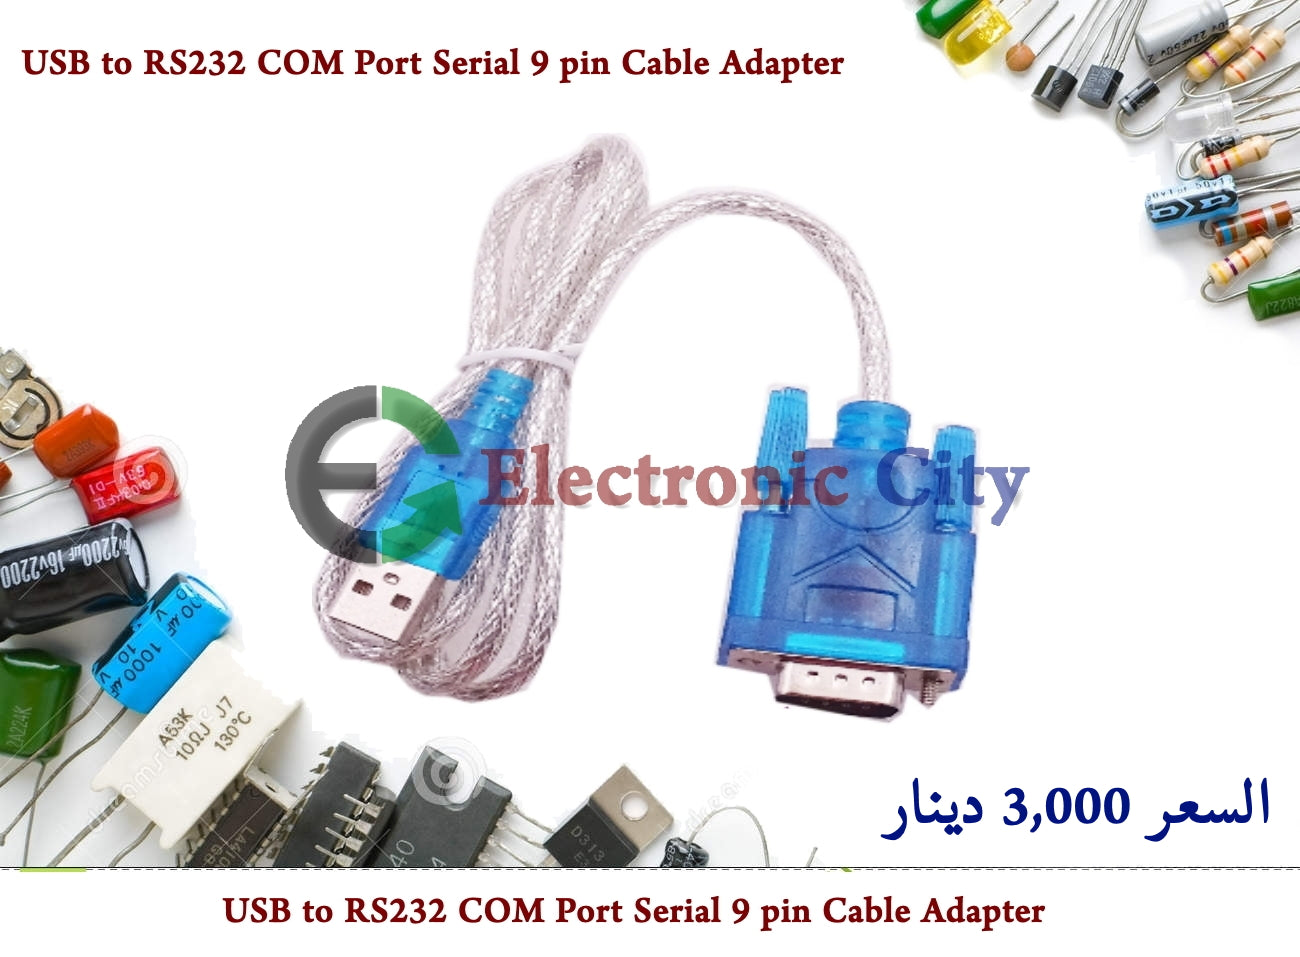 USB to RS232 COM Port Serial 9 pin Cable Adapter  #K2 050053